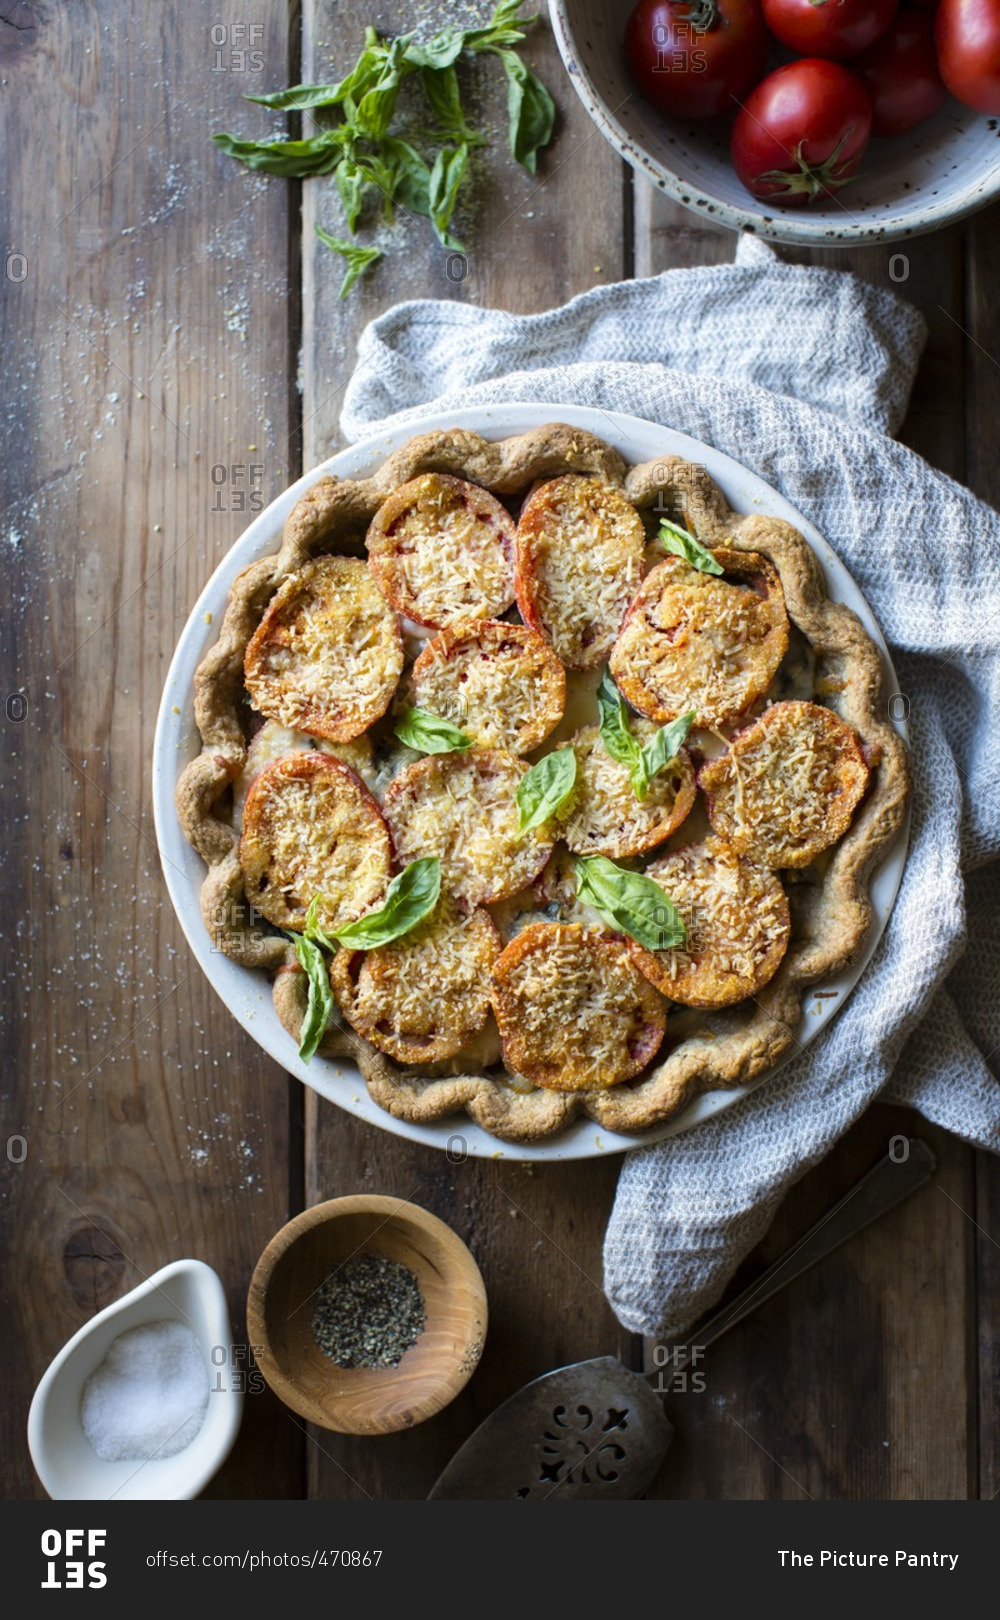 Tomato pie with basil and parmesan cheese